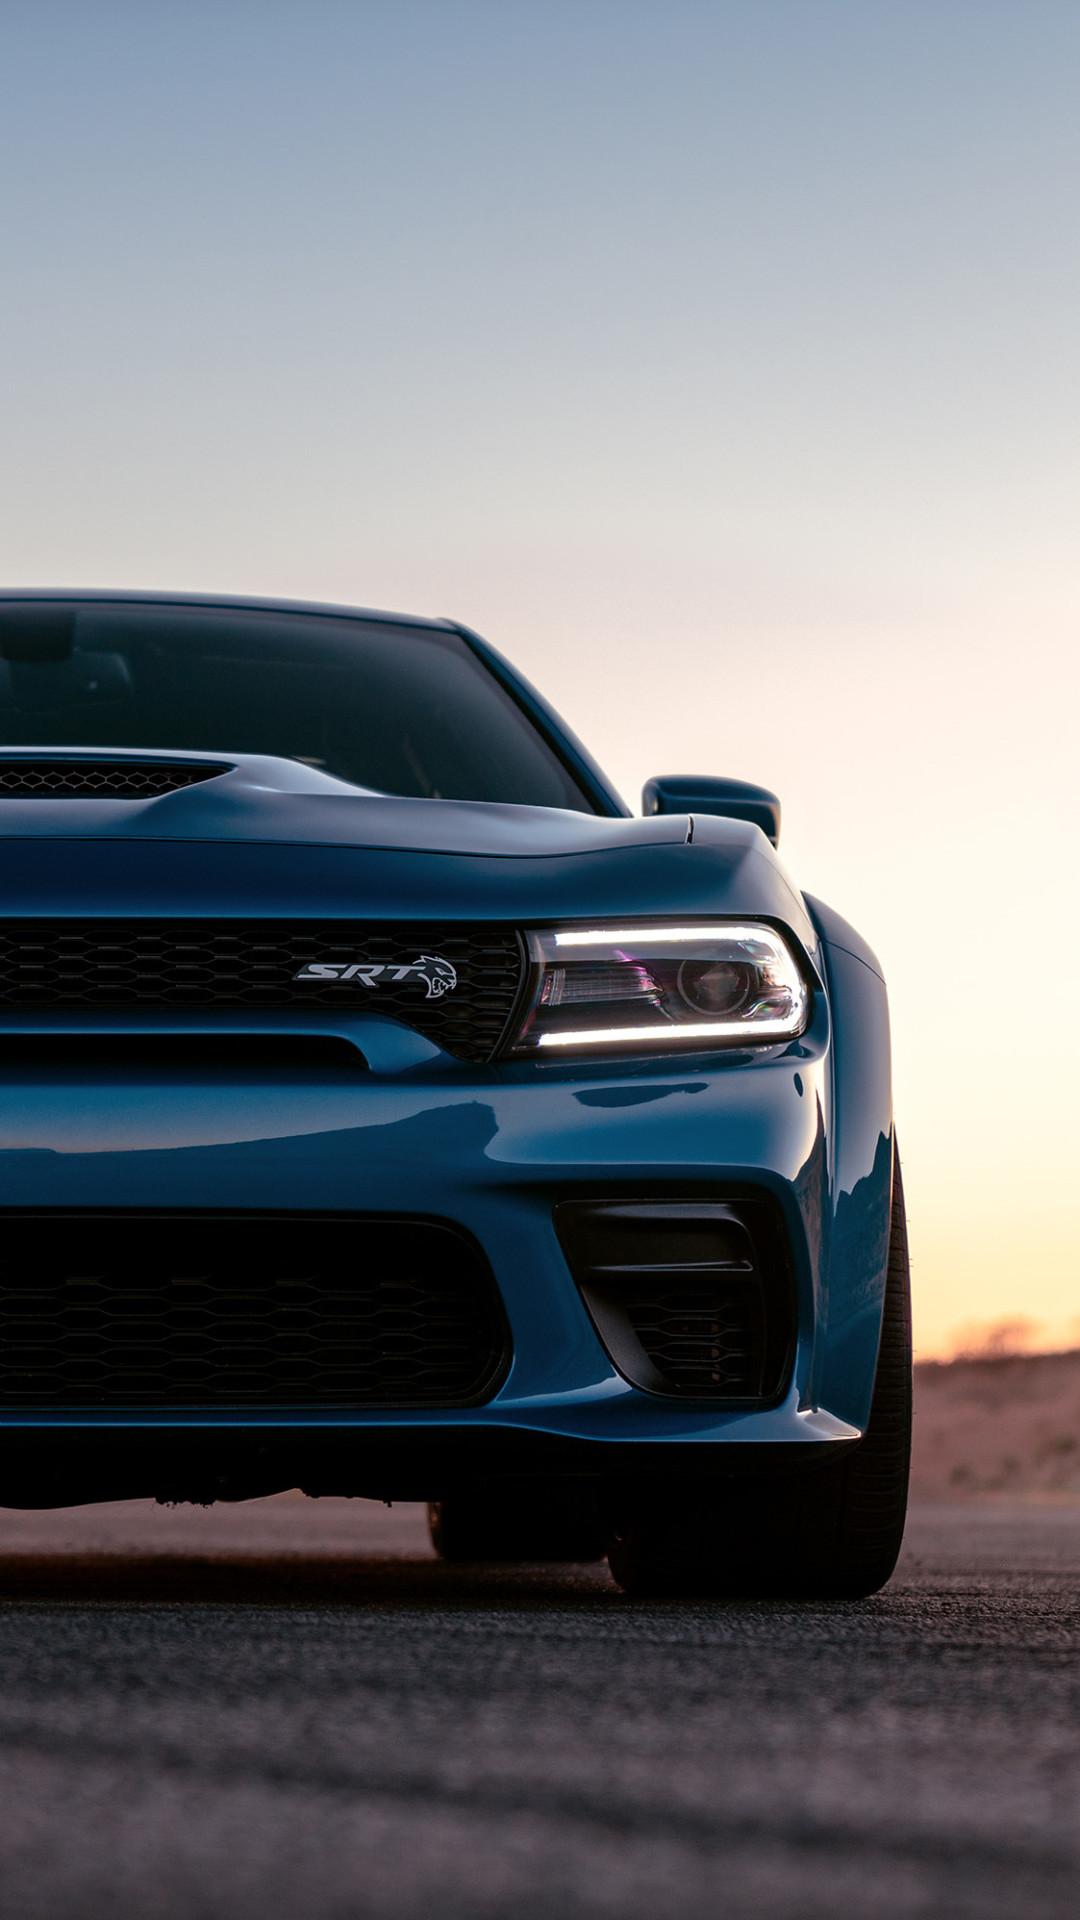 Dodge Charger Wallpaper 4K Iphone Free